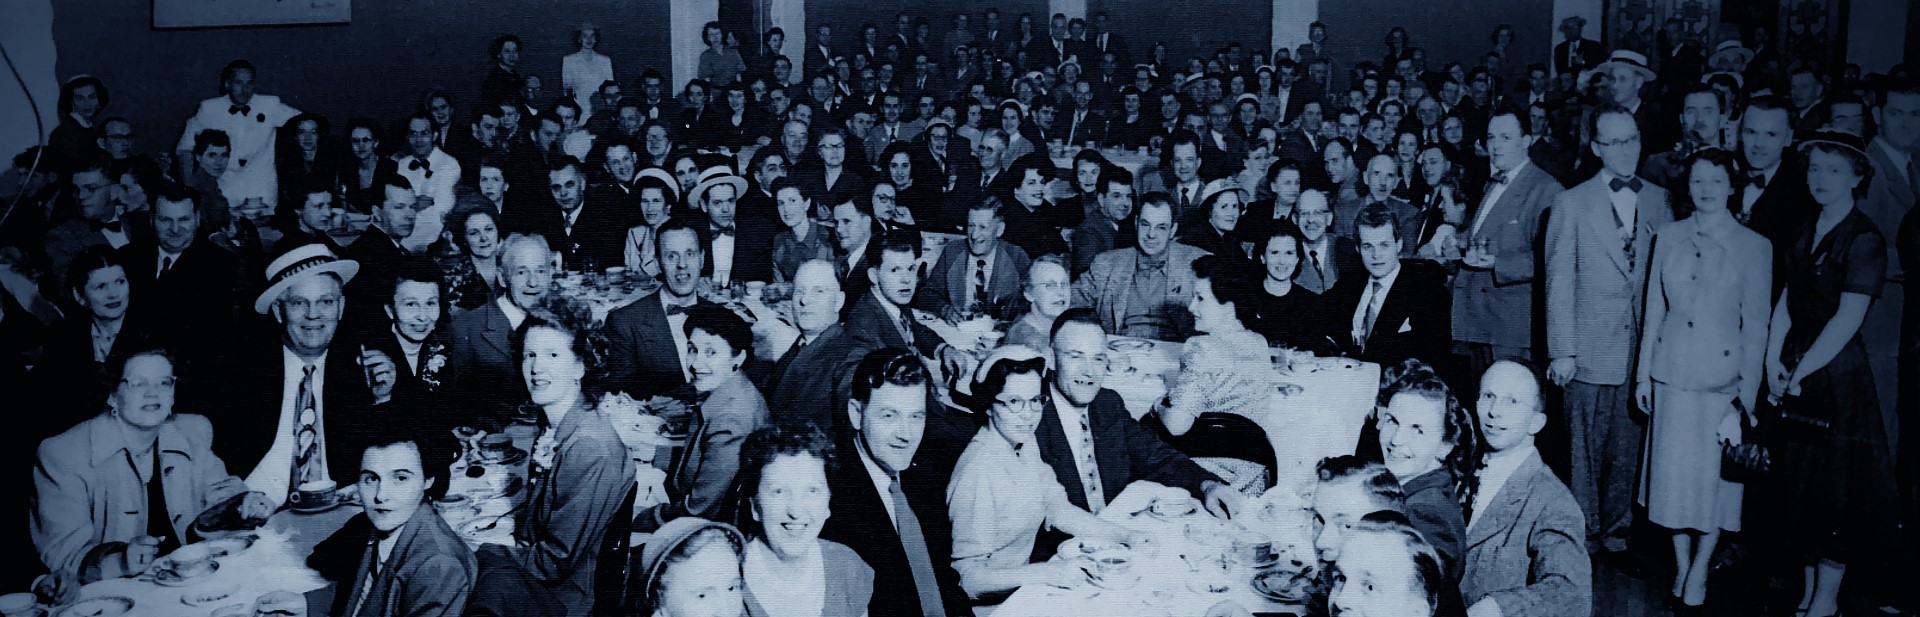 historic image of hvac convention dinner party in 1952